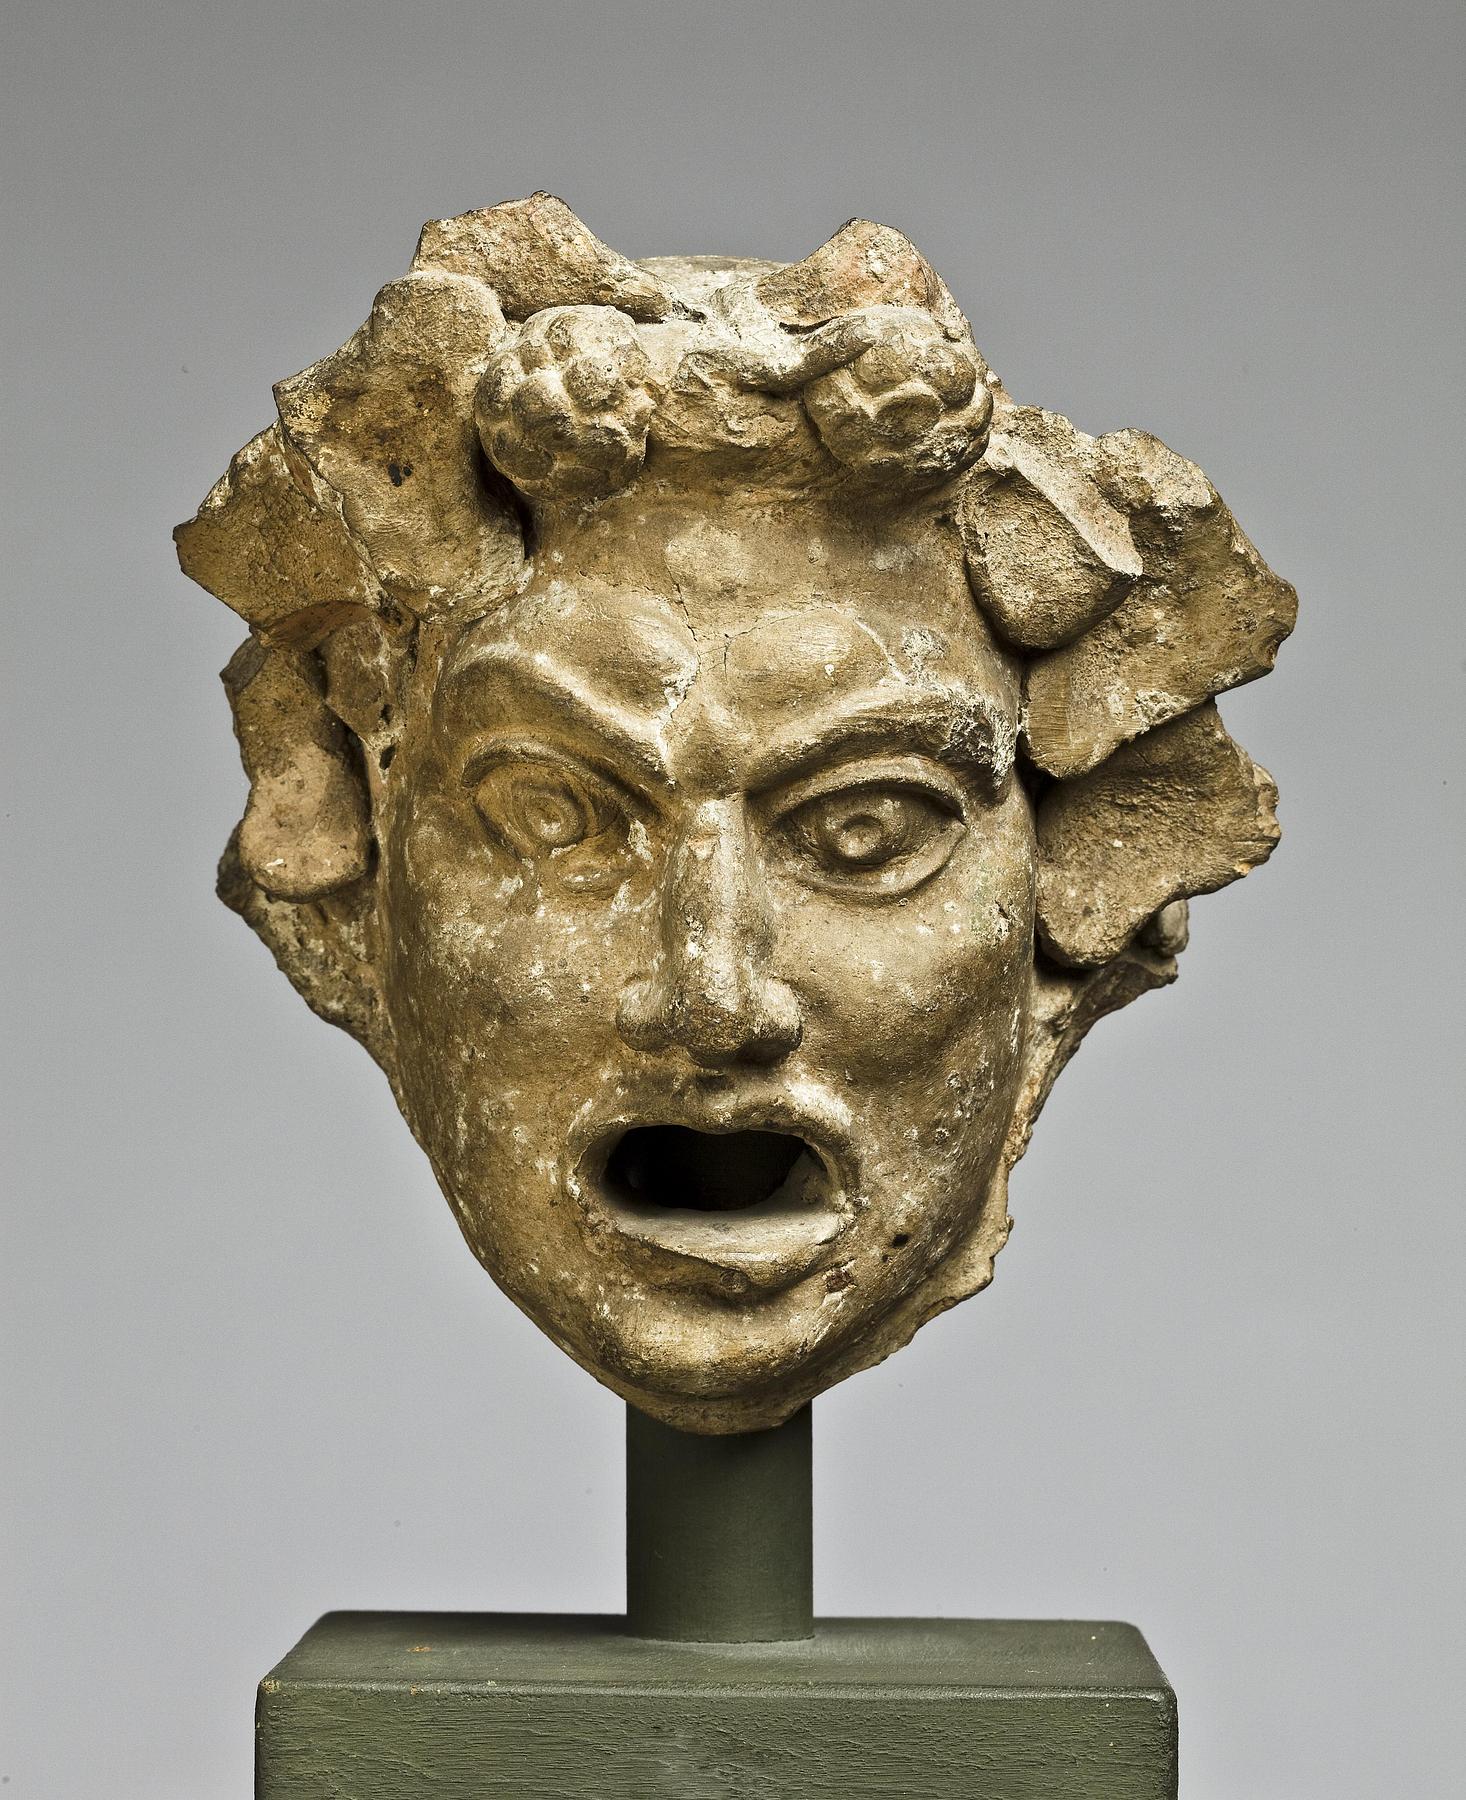 Water spout in the shape of a theatre mask, H1055